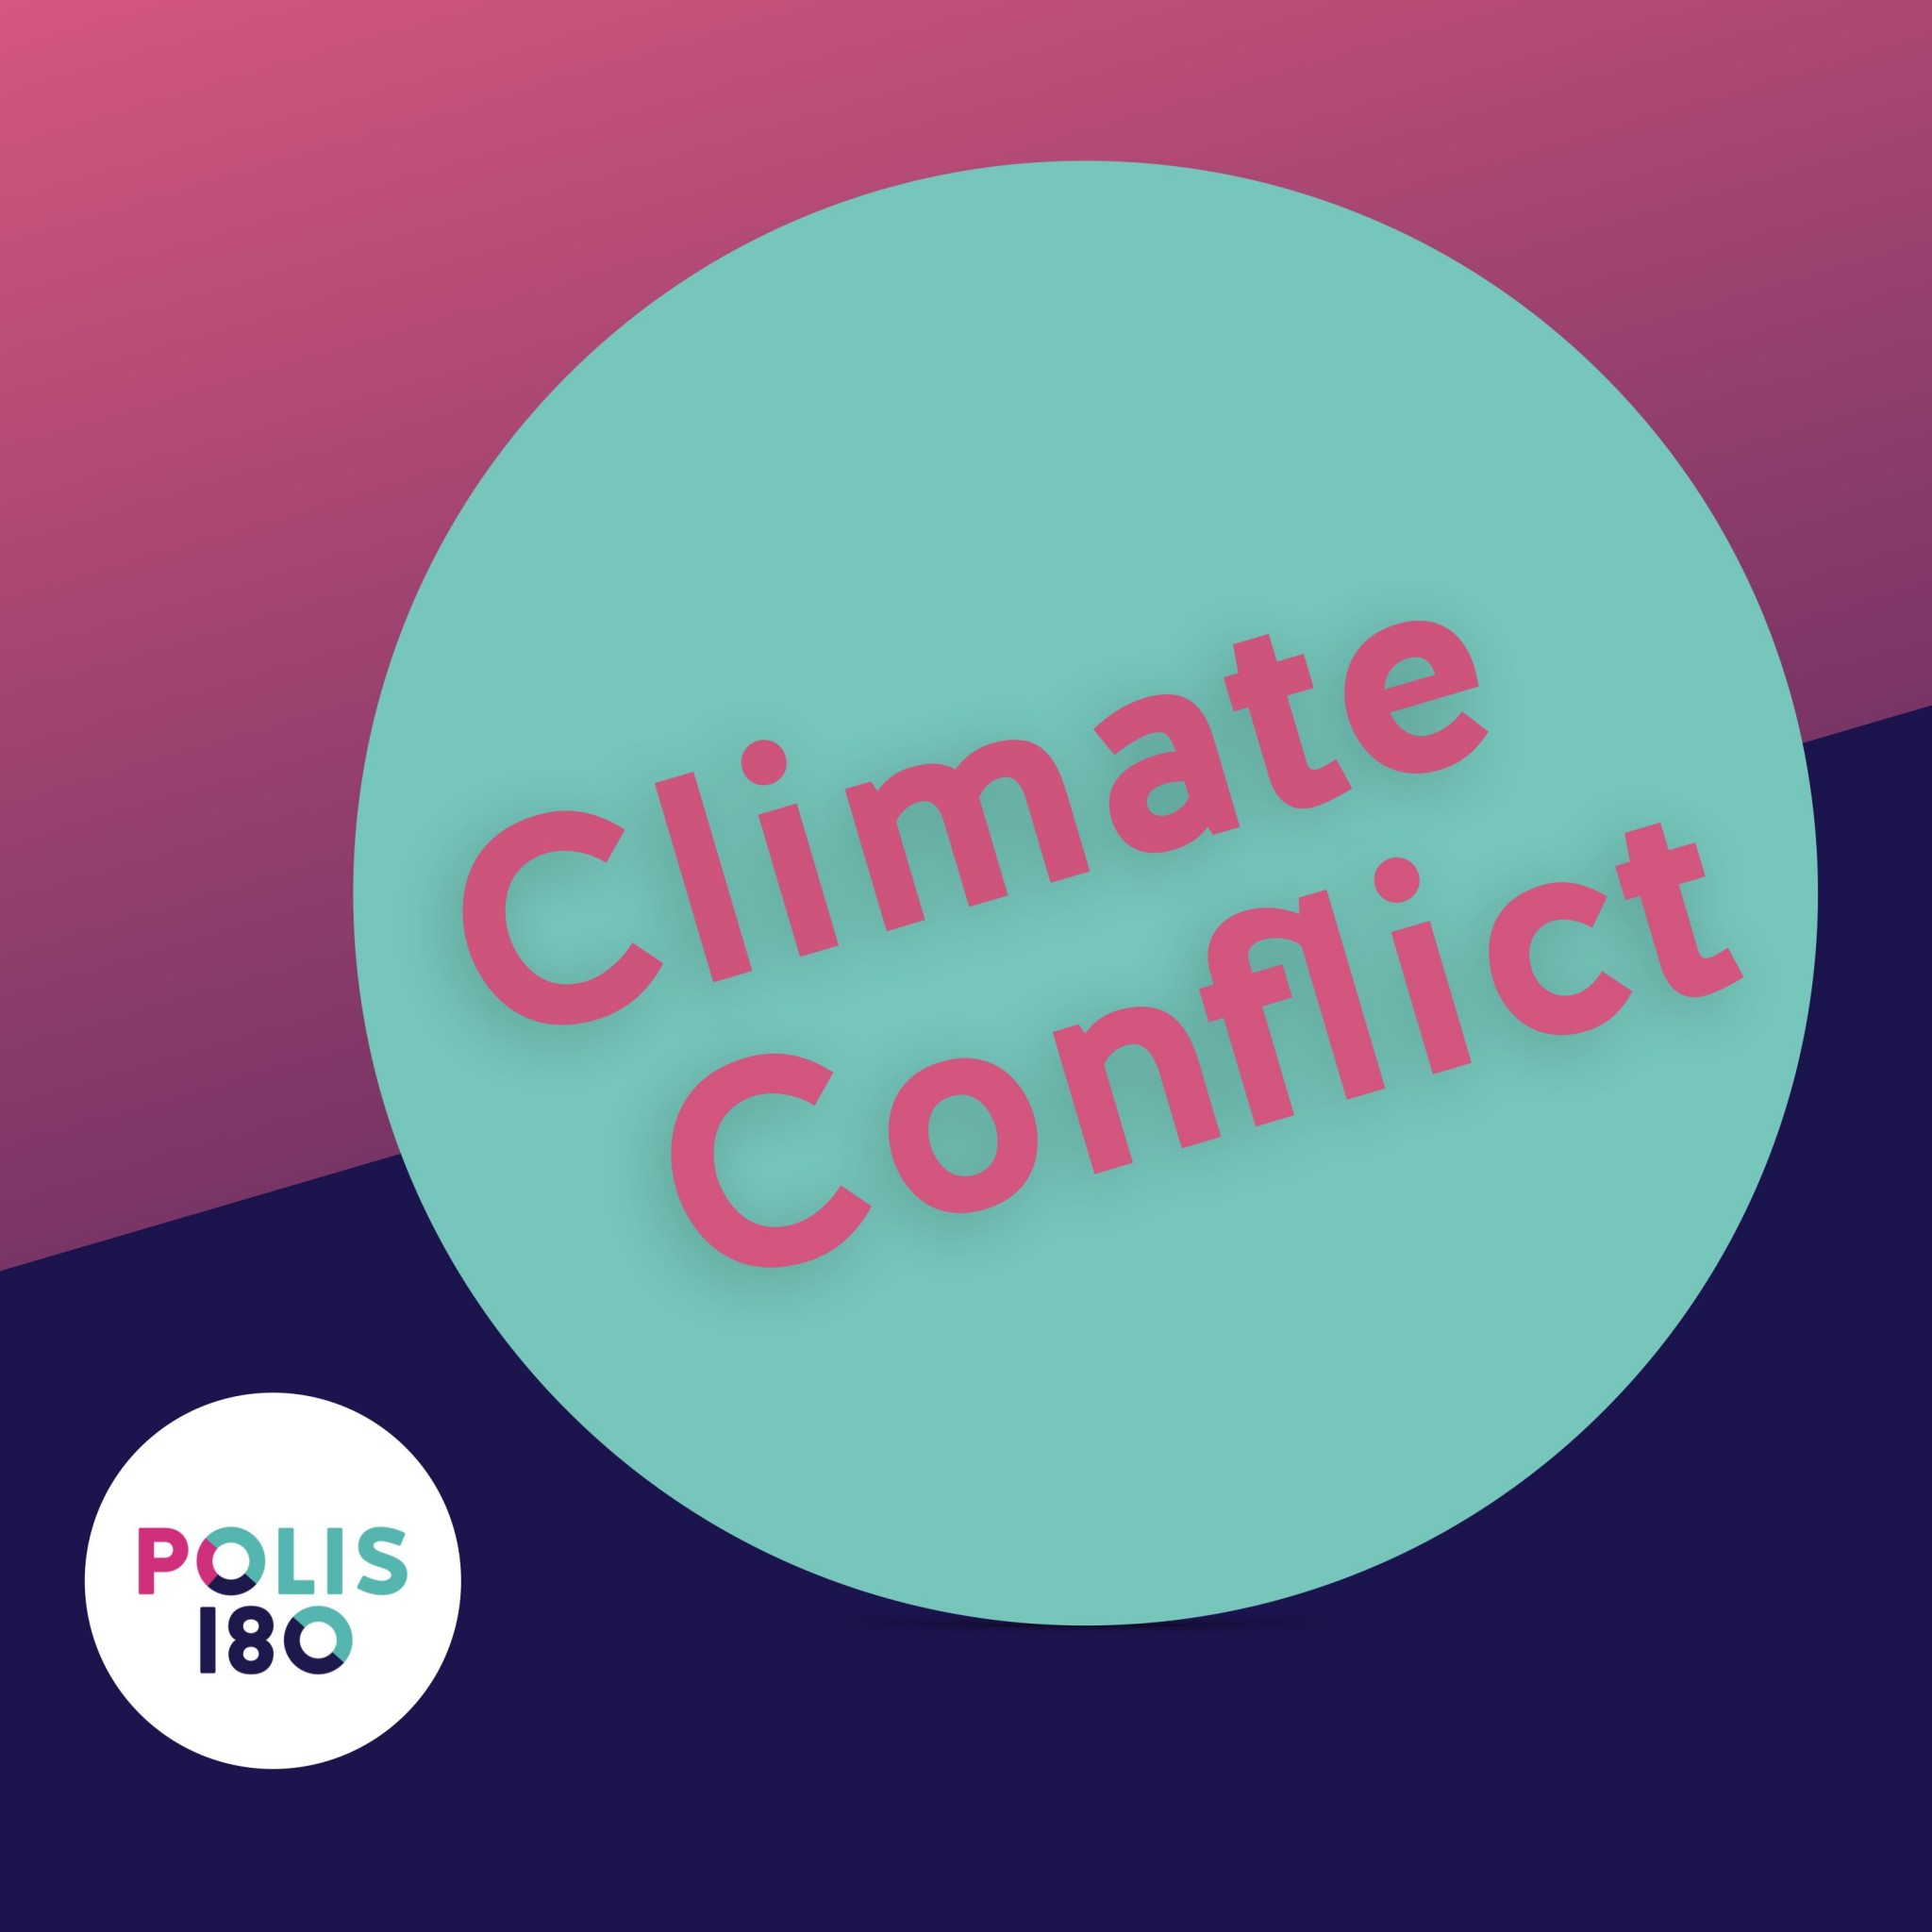 In this first episode of our podcast “ClimateConflict”, we discuss how and if climate change is fueling conflicts, how this relates to the war in Syria and what politicians can do to minimize these risks in the future.